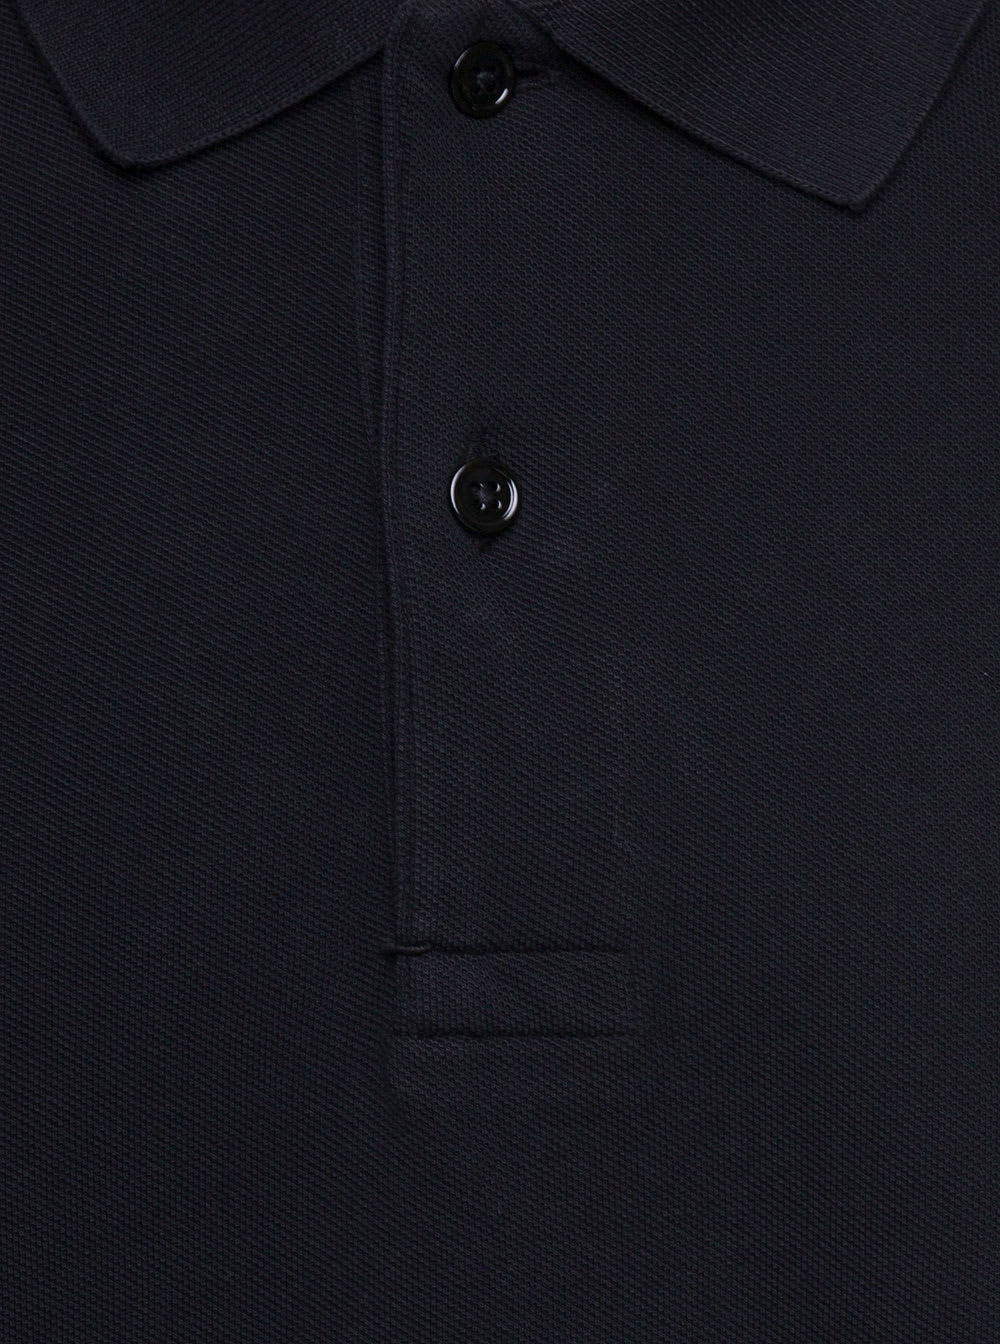 Shop Tom Ford Black Short-sleeves Polo In Cotton Piquet Jersey Man In Nero